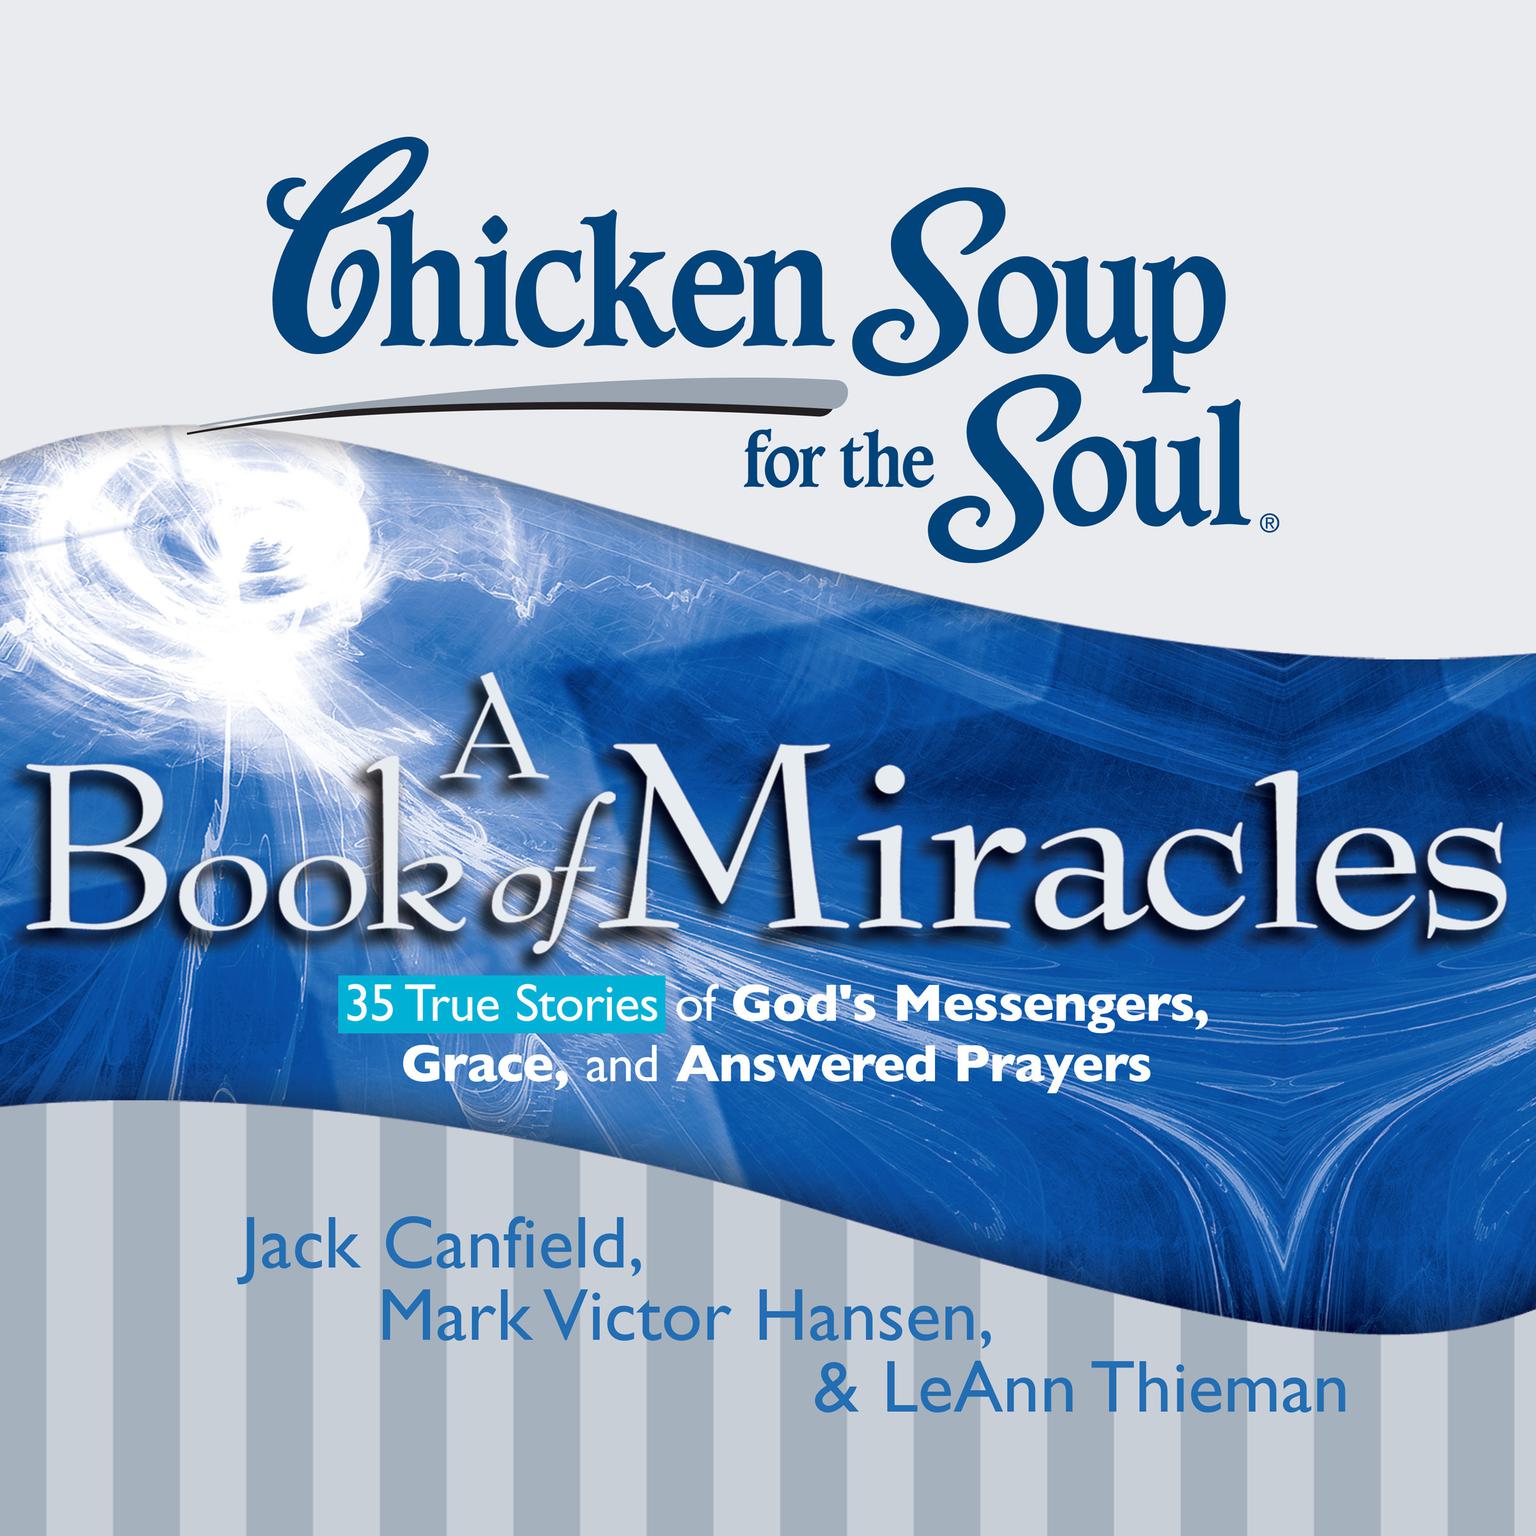 Chicken Soup for the Soul: A Book of Miracles - 35 True Stories of Gods Messengers, Grace, and Answered Prayers Audiobook, by Jack Canfield